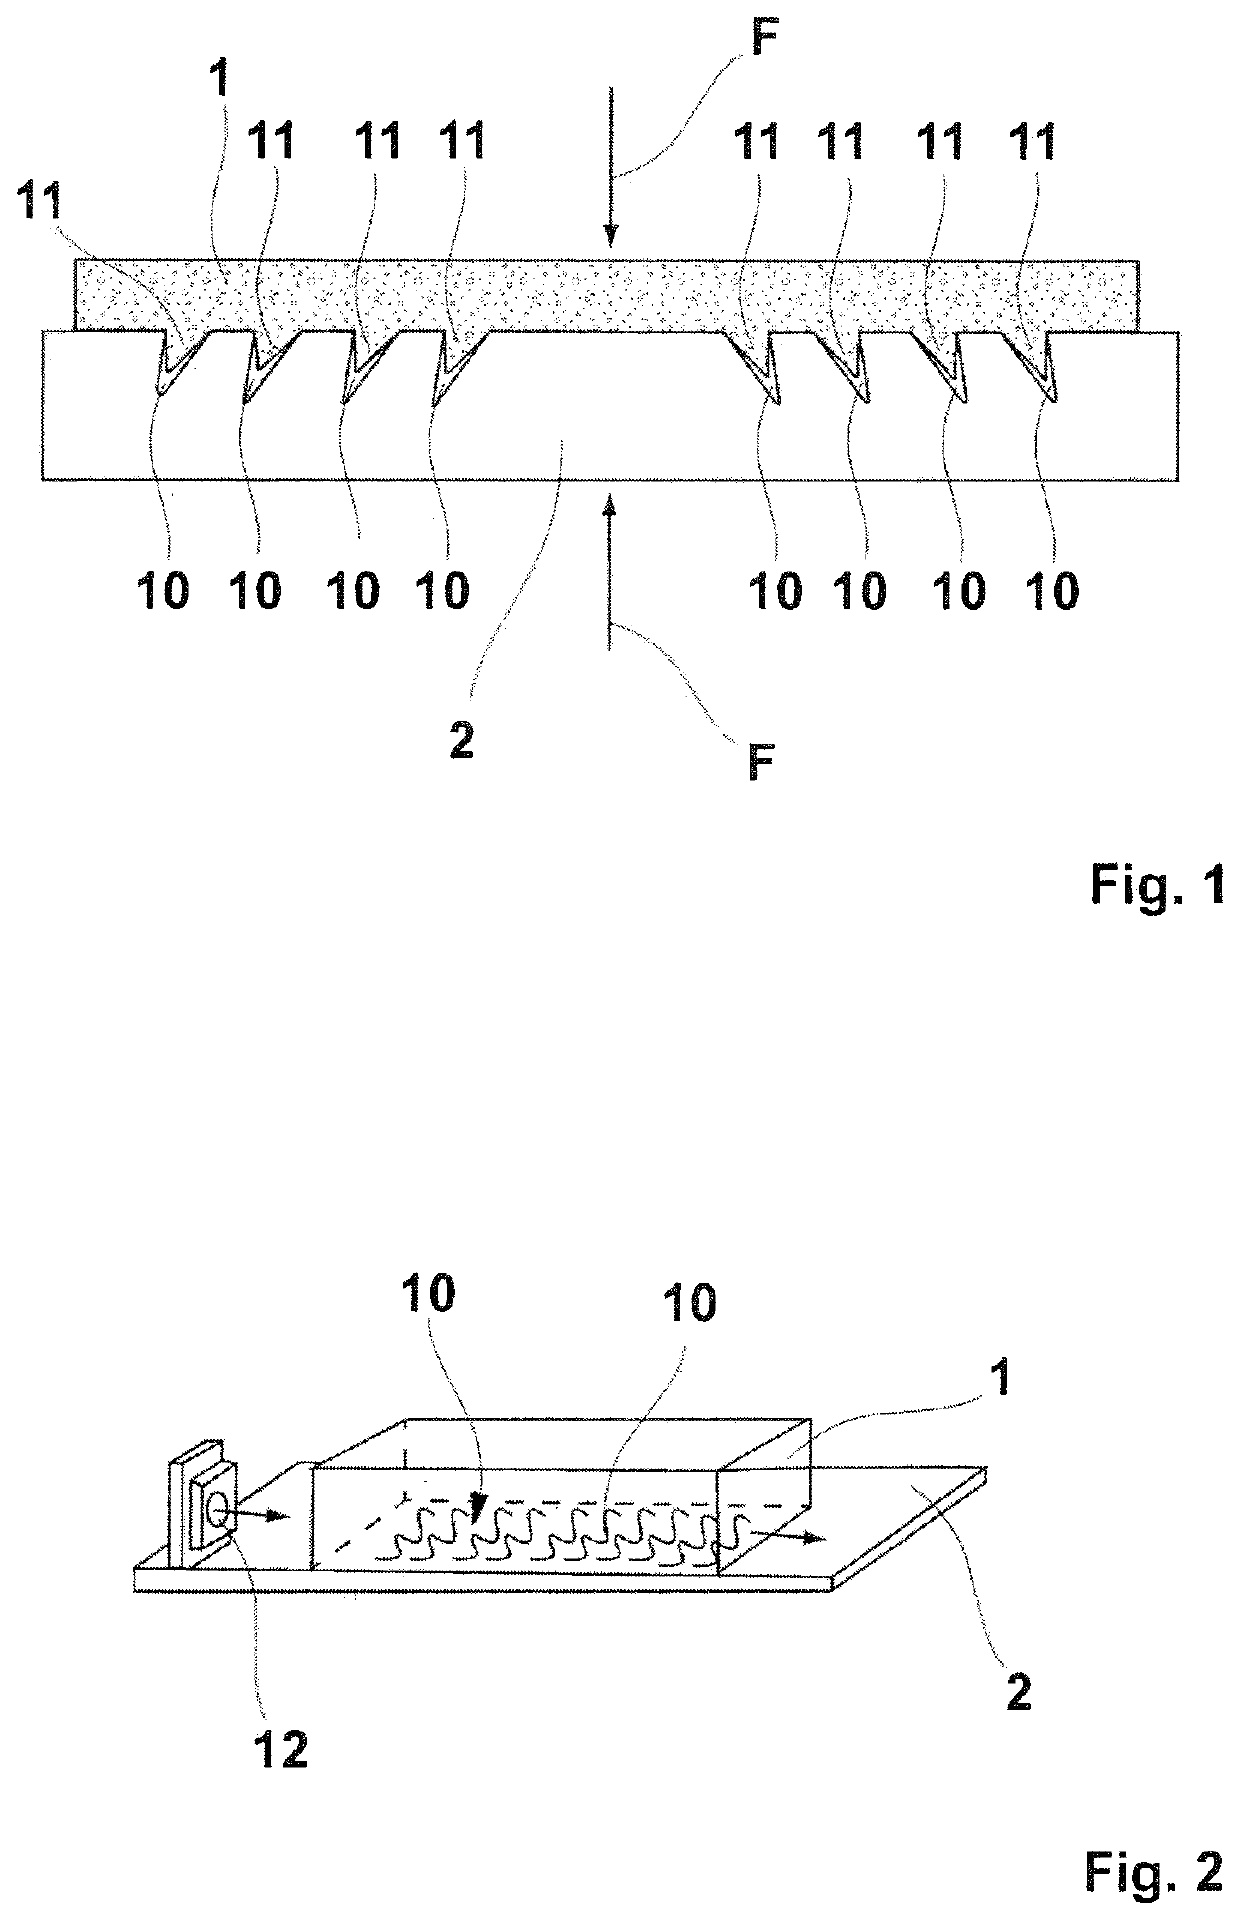 Method for producing a joint connection between a light-giving/optics plastic component and a metal component